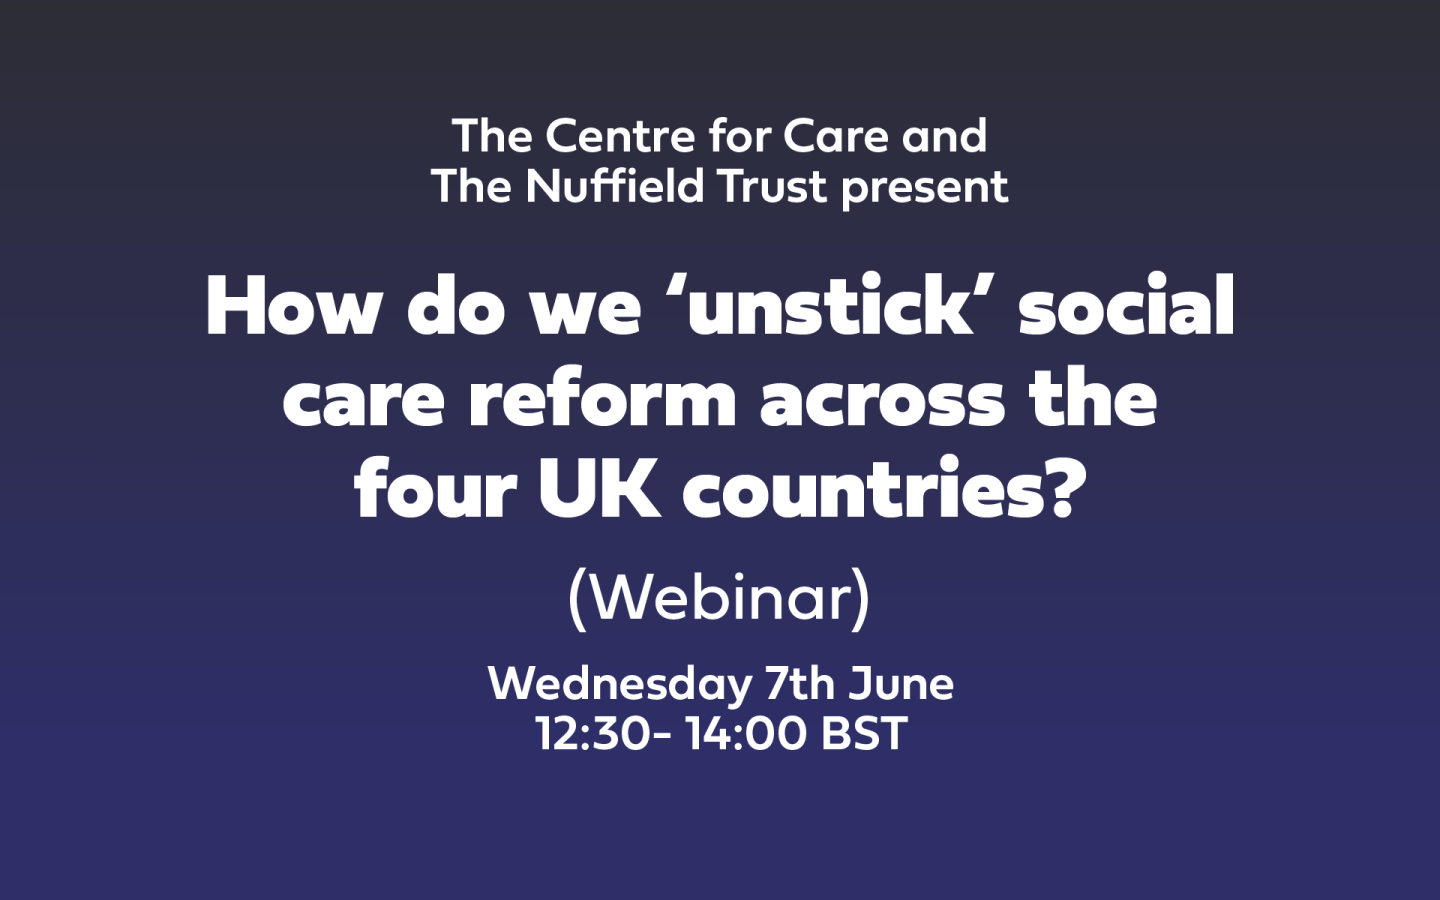 The Centre for Care and The Nuffield Trust presents 'How do we ‘unstick’ social care reform across the four UK countries' Online event 7th June 12:30- 14:00 BST